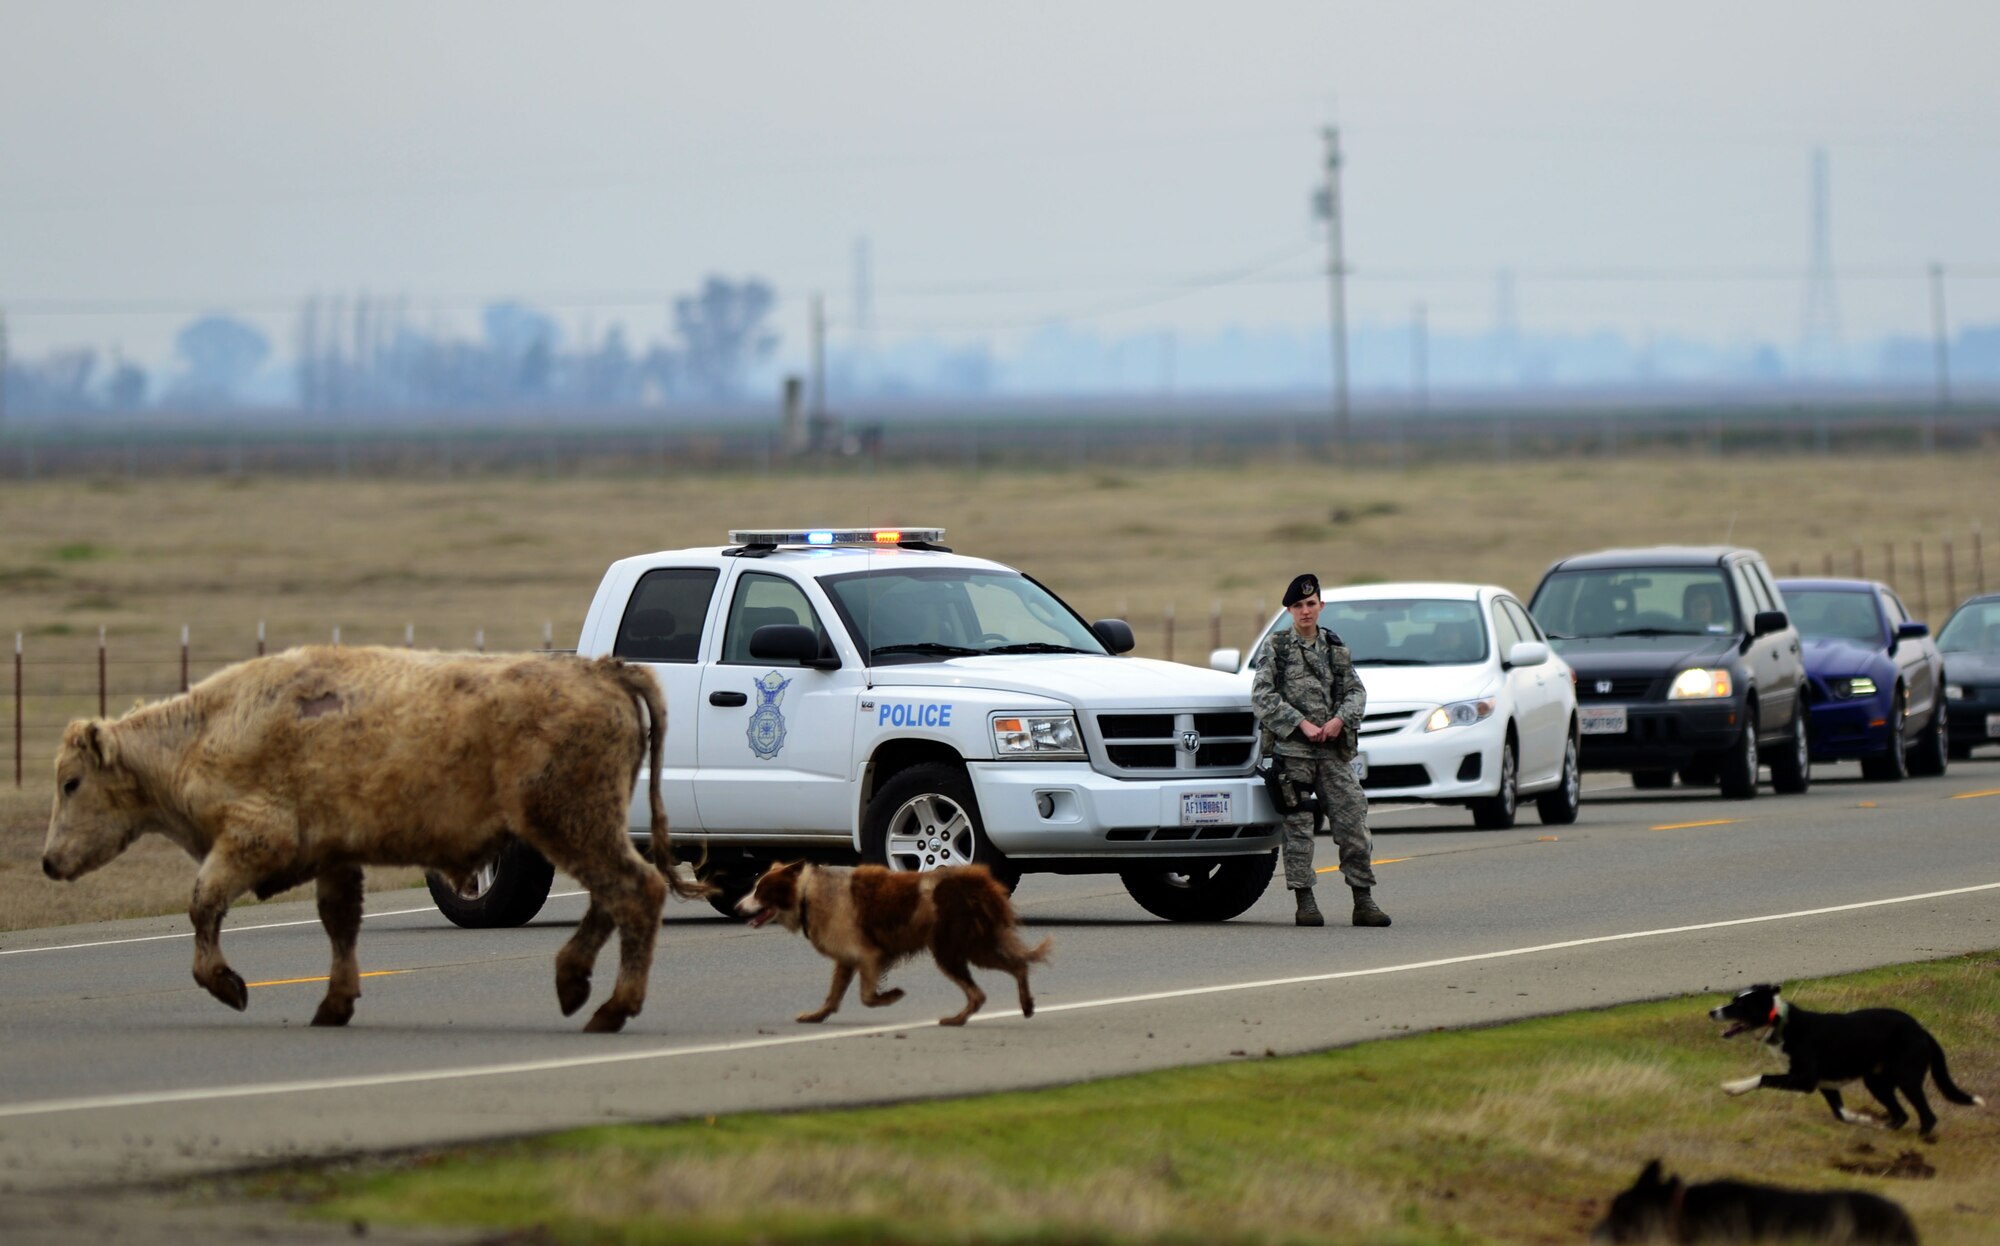 Senior Airman Kirsten Bradley, 9th Security Forces Sqadron partolman, restricts traffic on Gavin Mandery Drive as a heifer is corraled by trained dogs Jan. 9, 2013, at Beale Air Force Base, Calif. (U.S. Air Force photo by Airman 1st Class Drew Buchanan/Released)